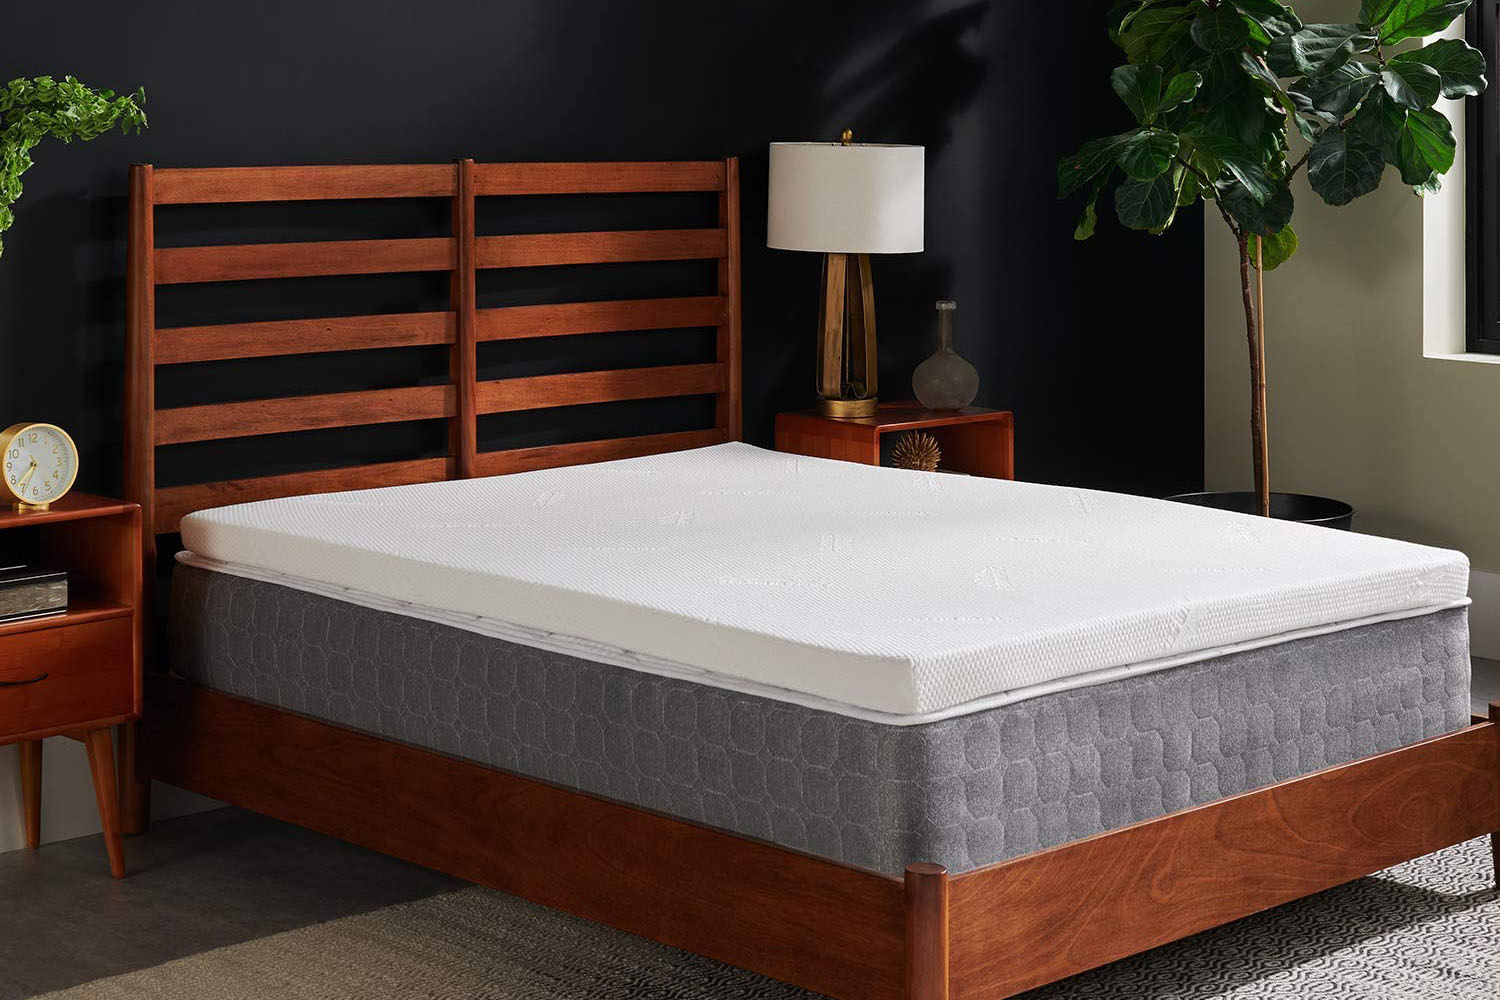 The Utopia Quilted Mattress Pad Is on Sale for $15 at